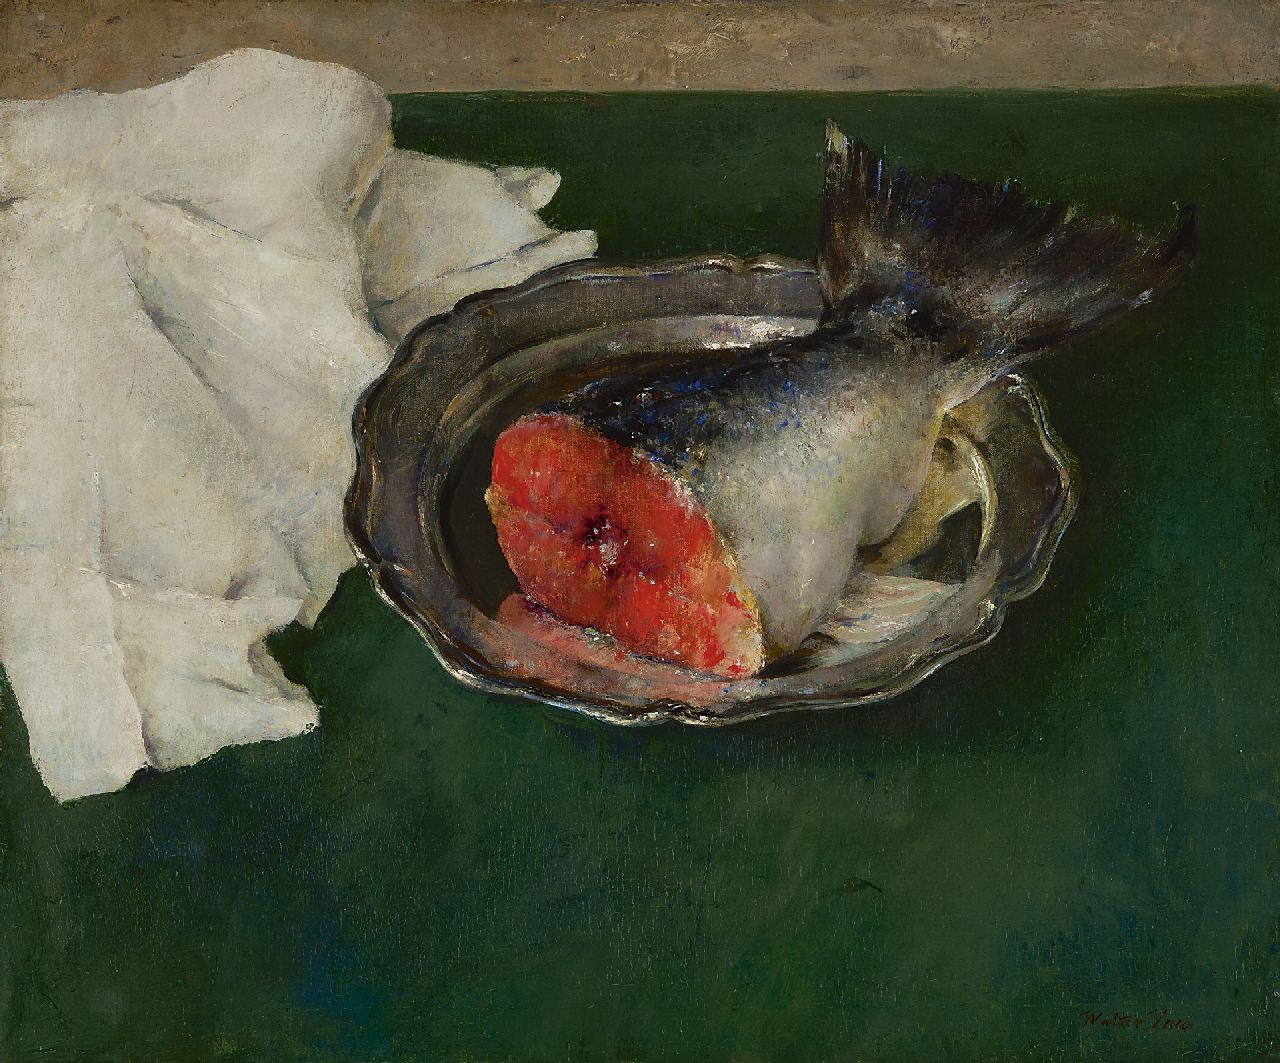 Vaes W.  | Walter Vaes, Salmon on a pewter plate, oil on canvas 49.9 x 60.1 cm, signed l.r.